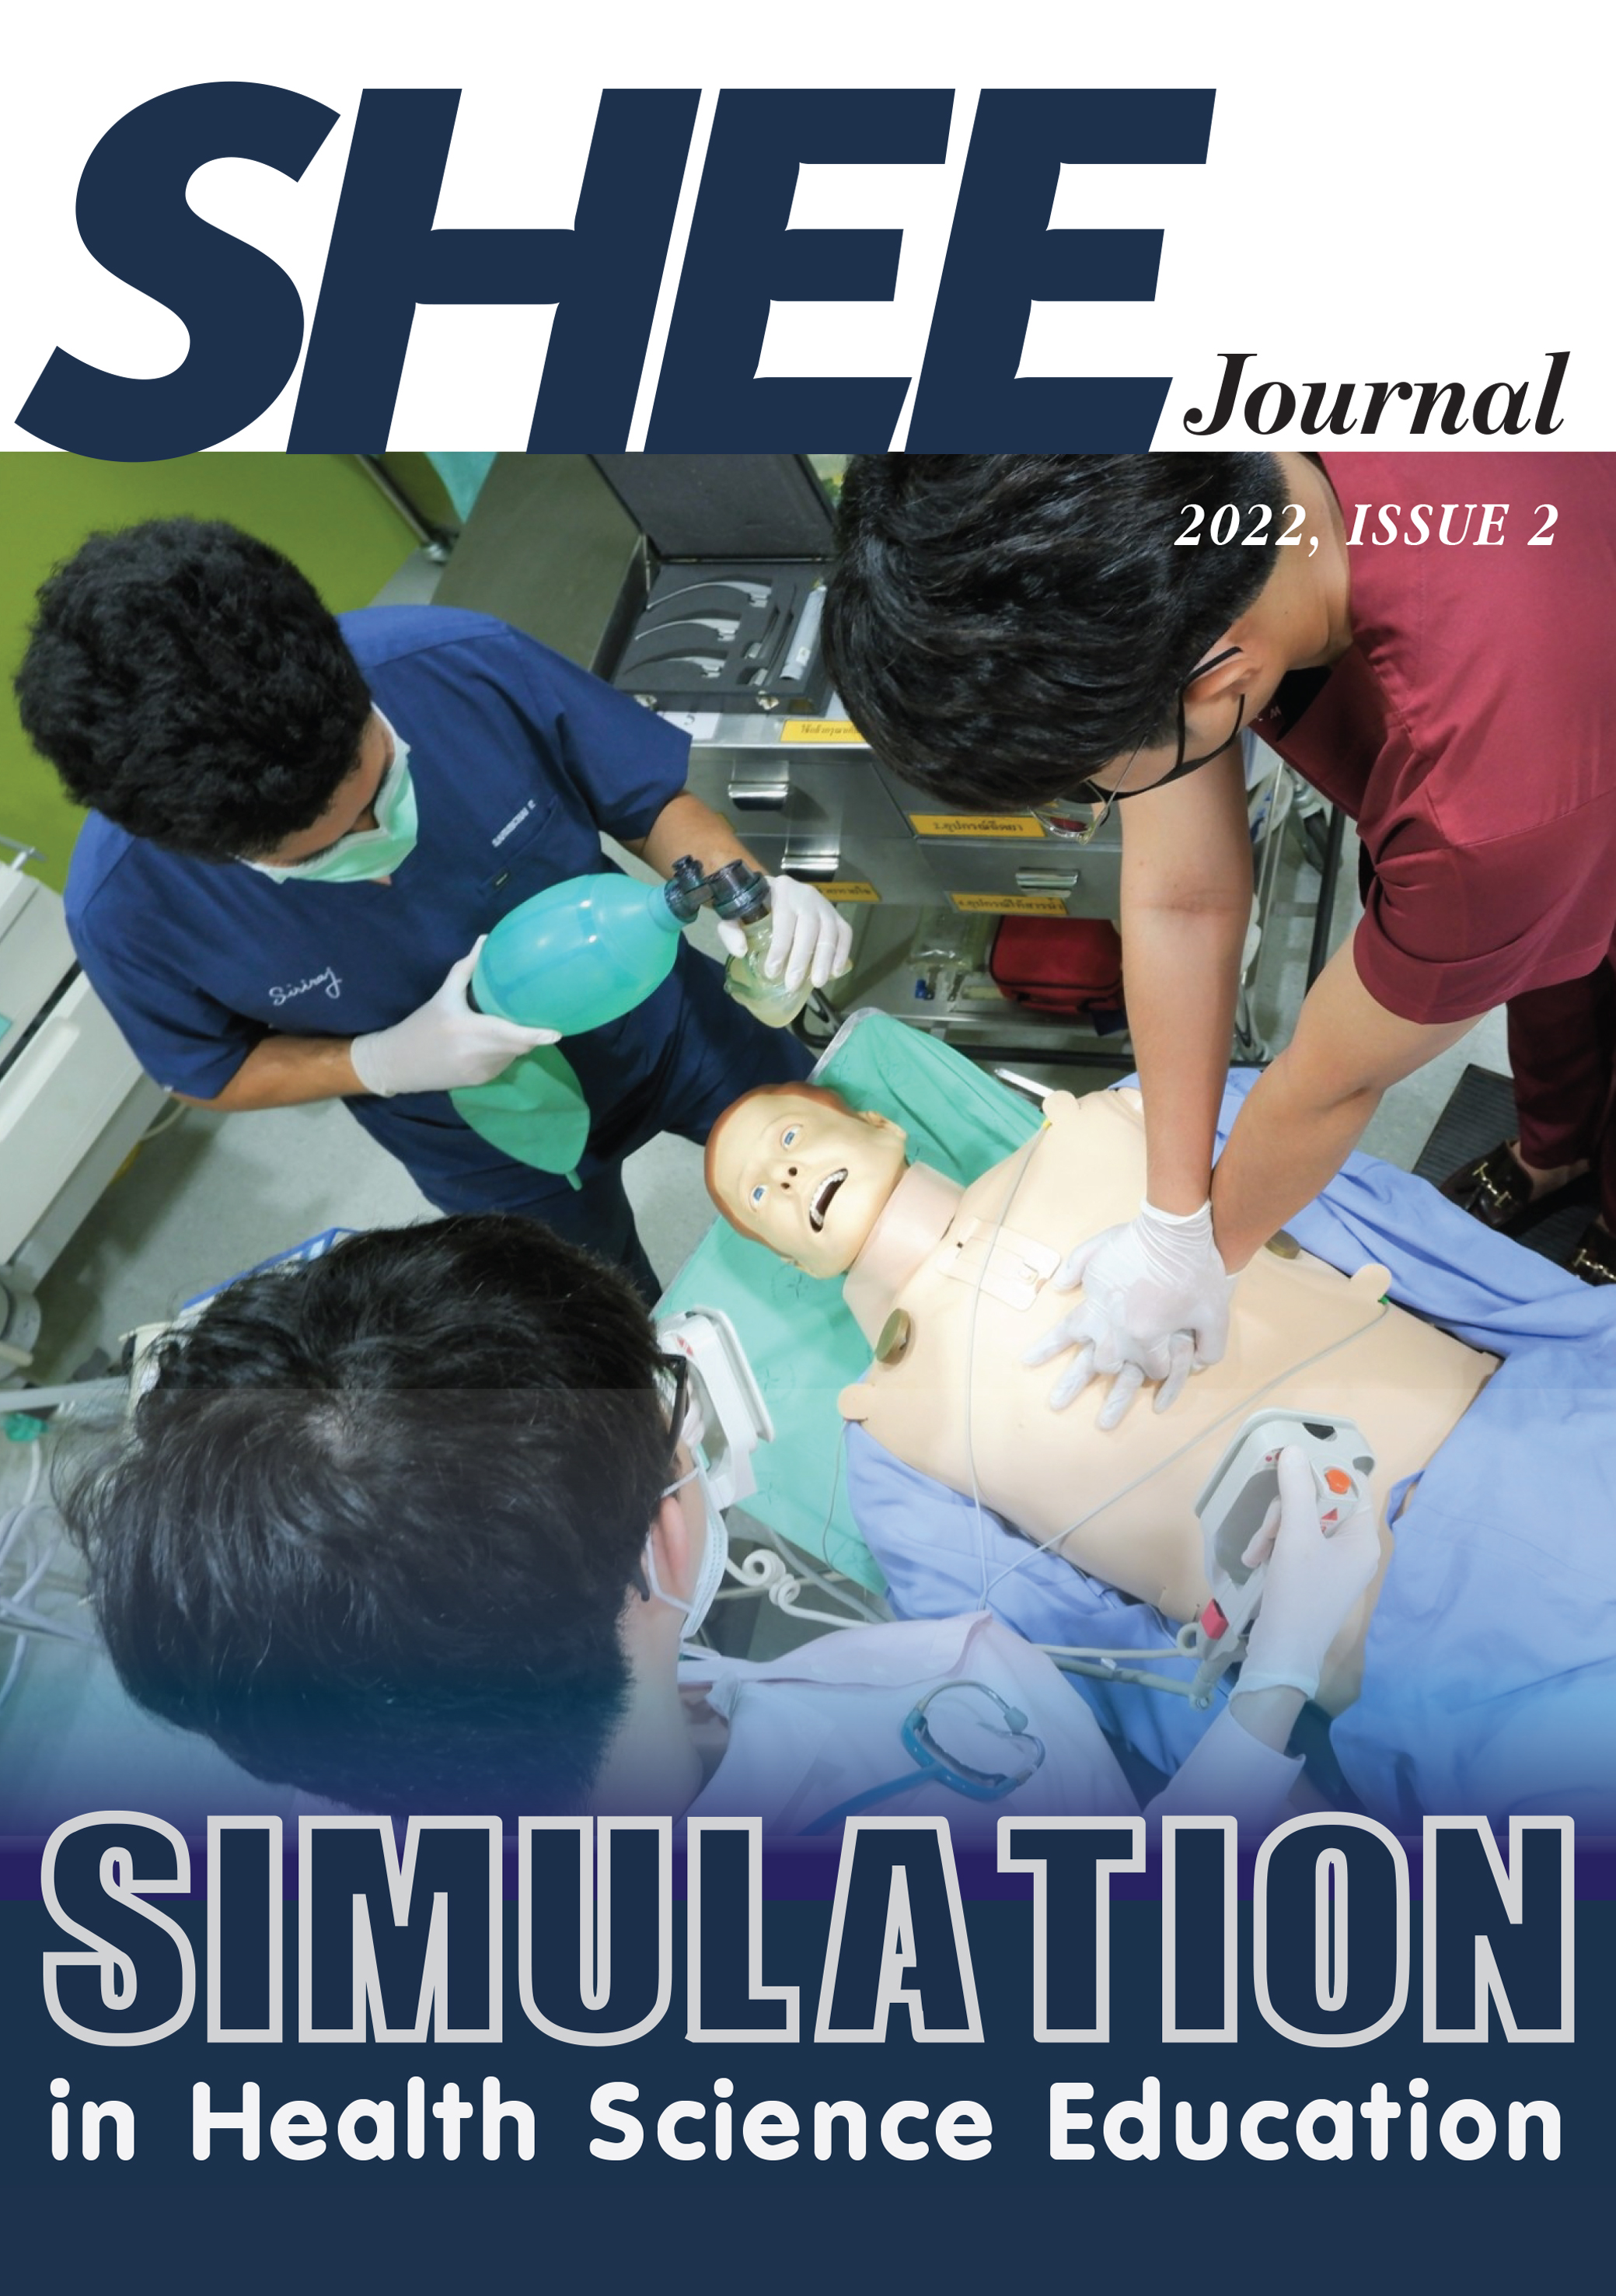 Journal Issue 2, 2022 เรื่อง Simulation in health science education